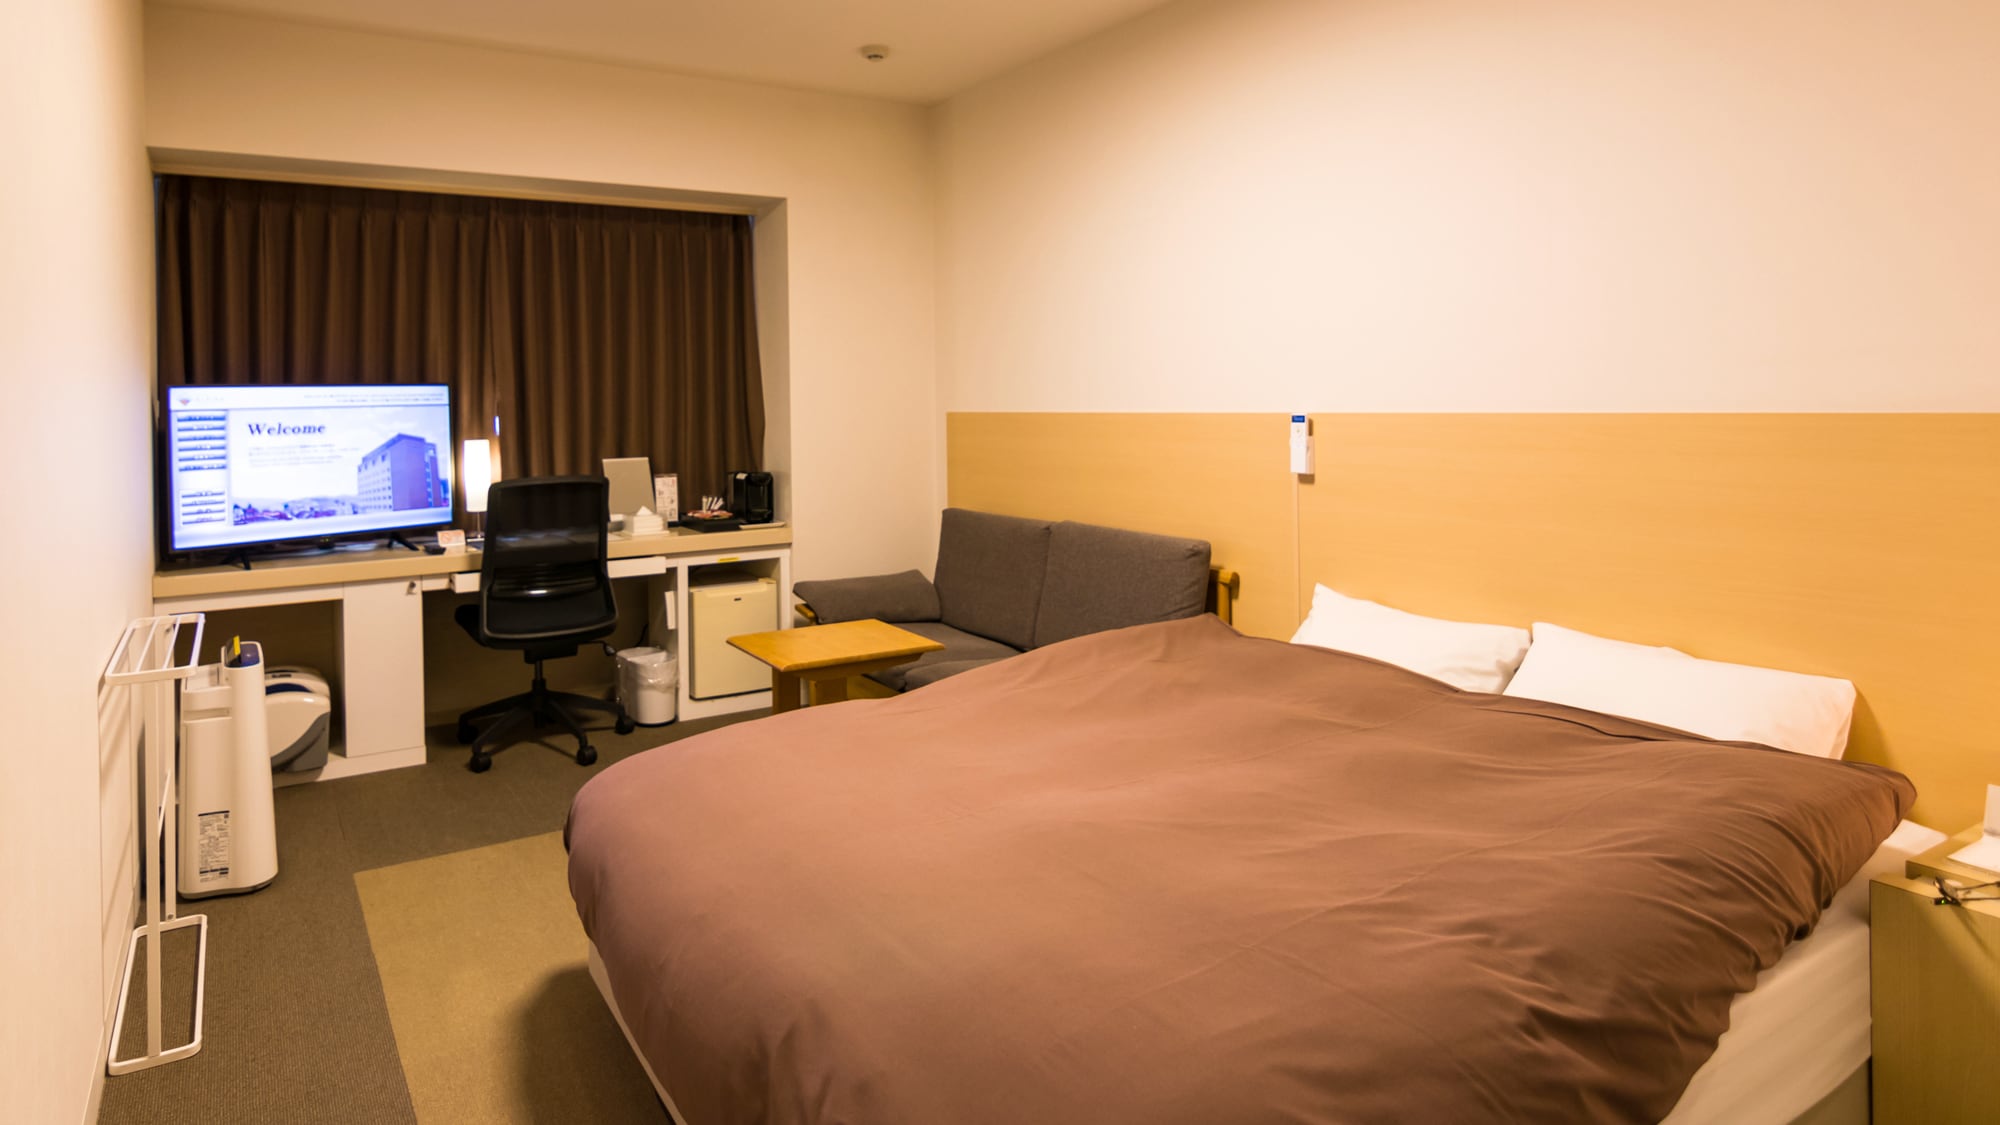 Deluxe double room with 160 cm wide bed and sofa. Equipped with special equipment and linen.